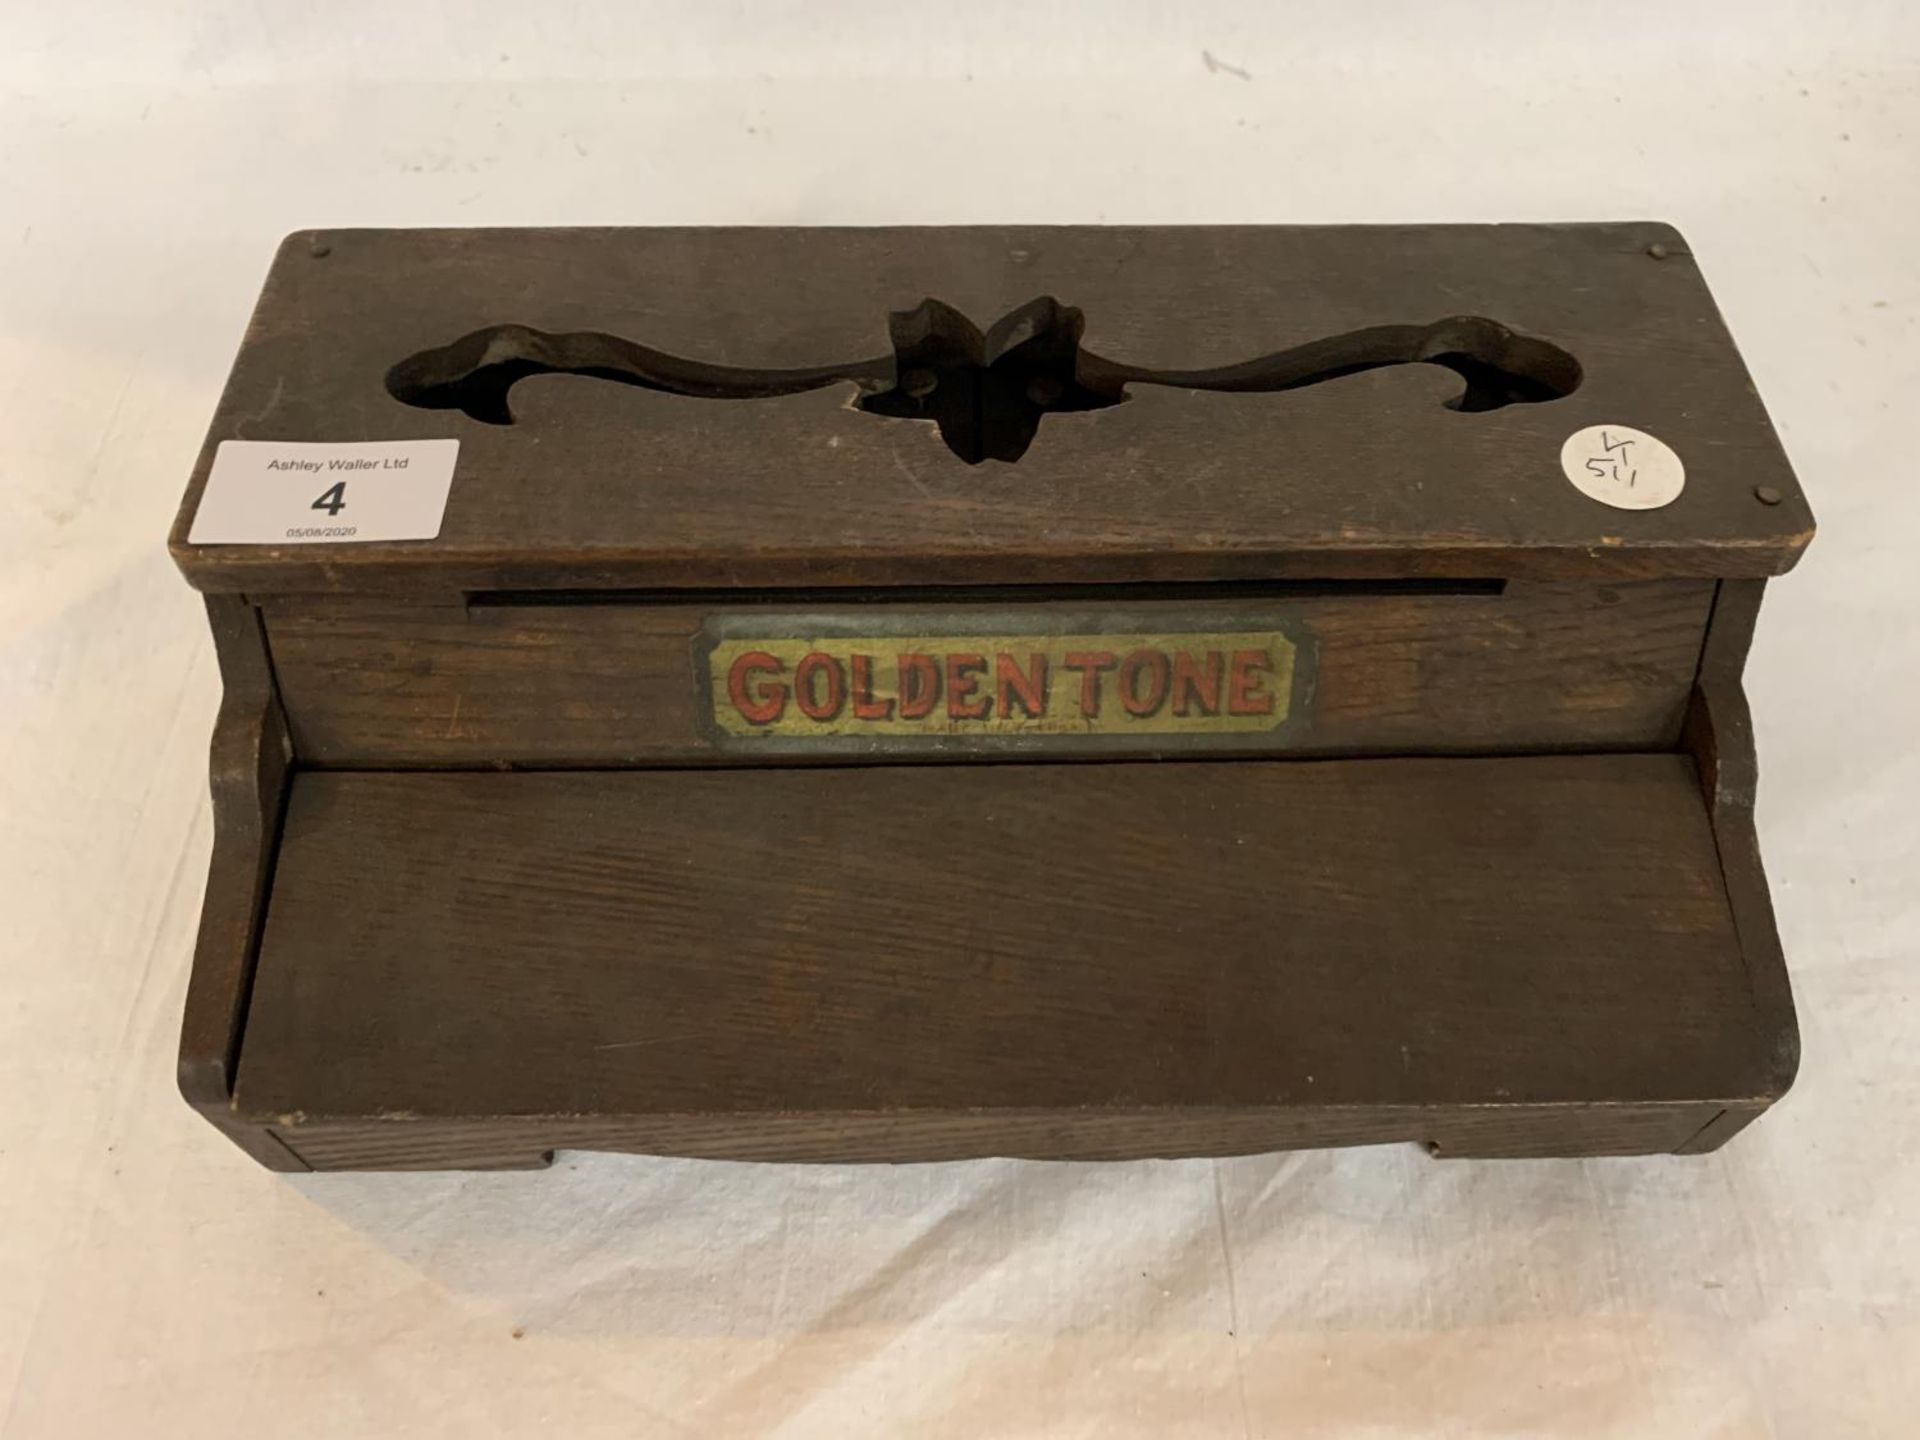 A VINTAGE GOLDEN TONE MINIATURE PIANO (KEY MISSING) - Image 2 of 6